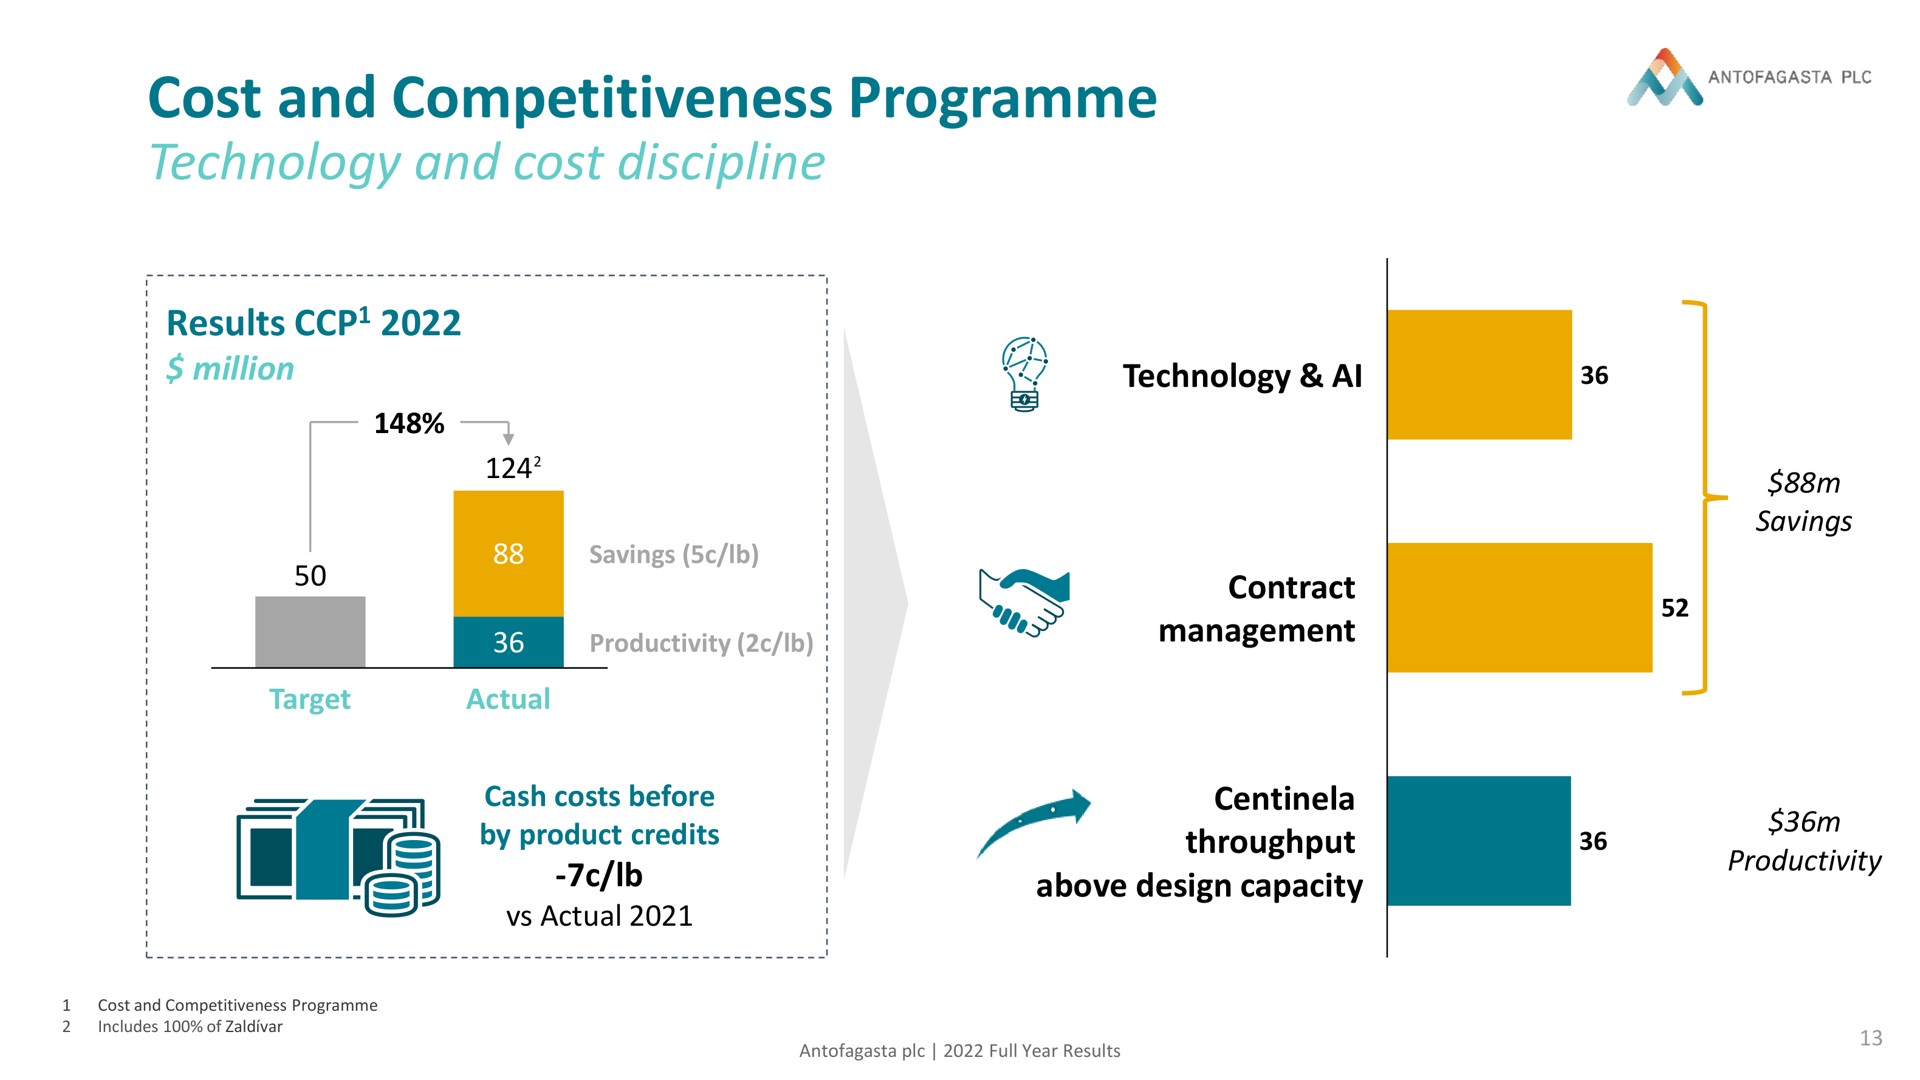 cost and competitiveness technology and cost discipline | Antofagasta